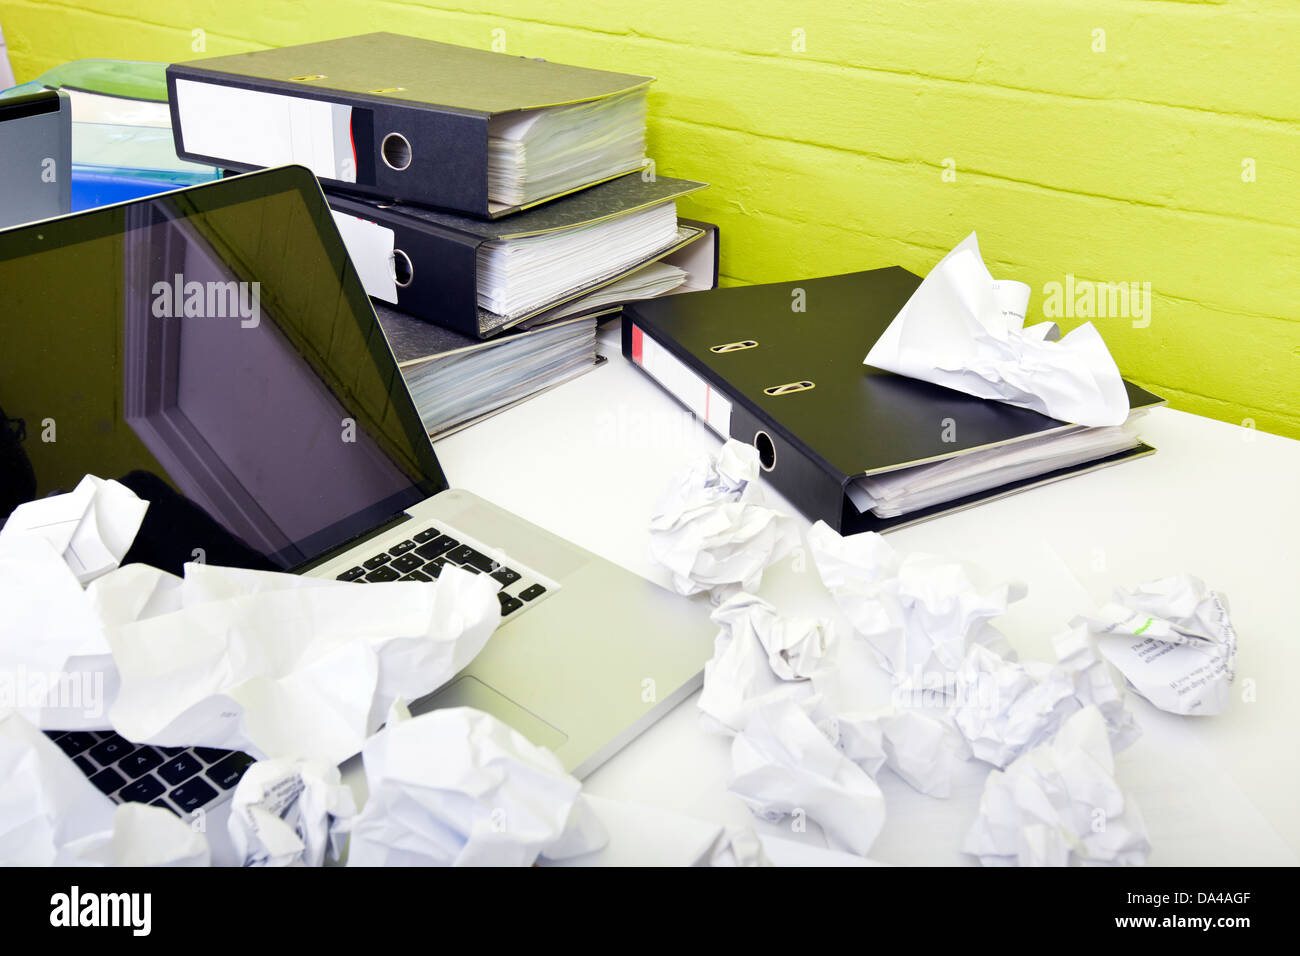 Close-up view of crumpled paper over laptop on desk with empty chair and folders Stock Photo